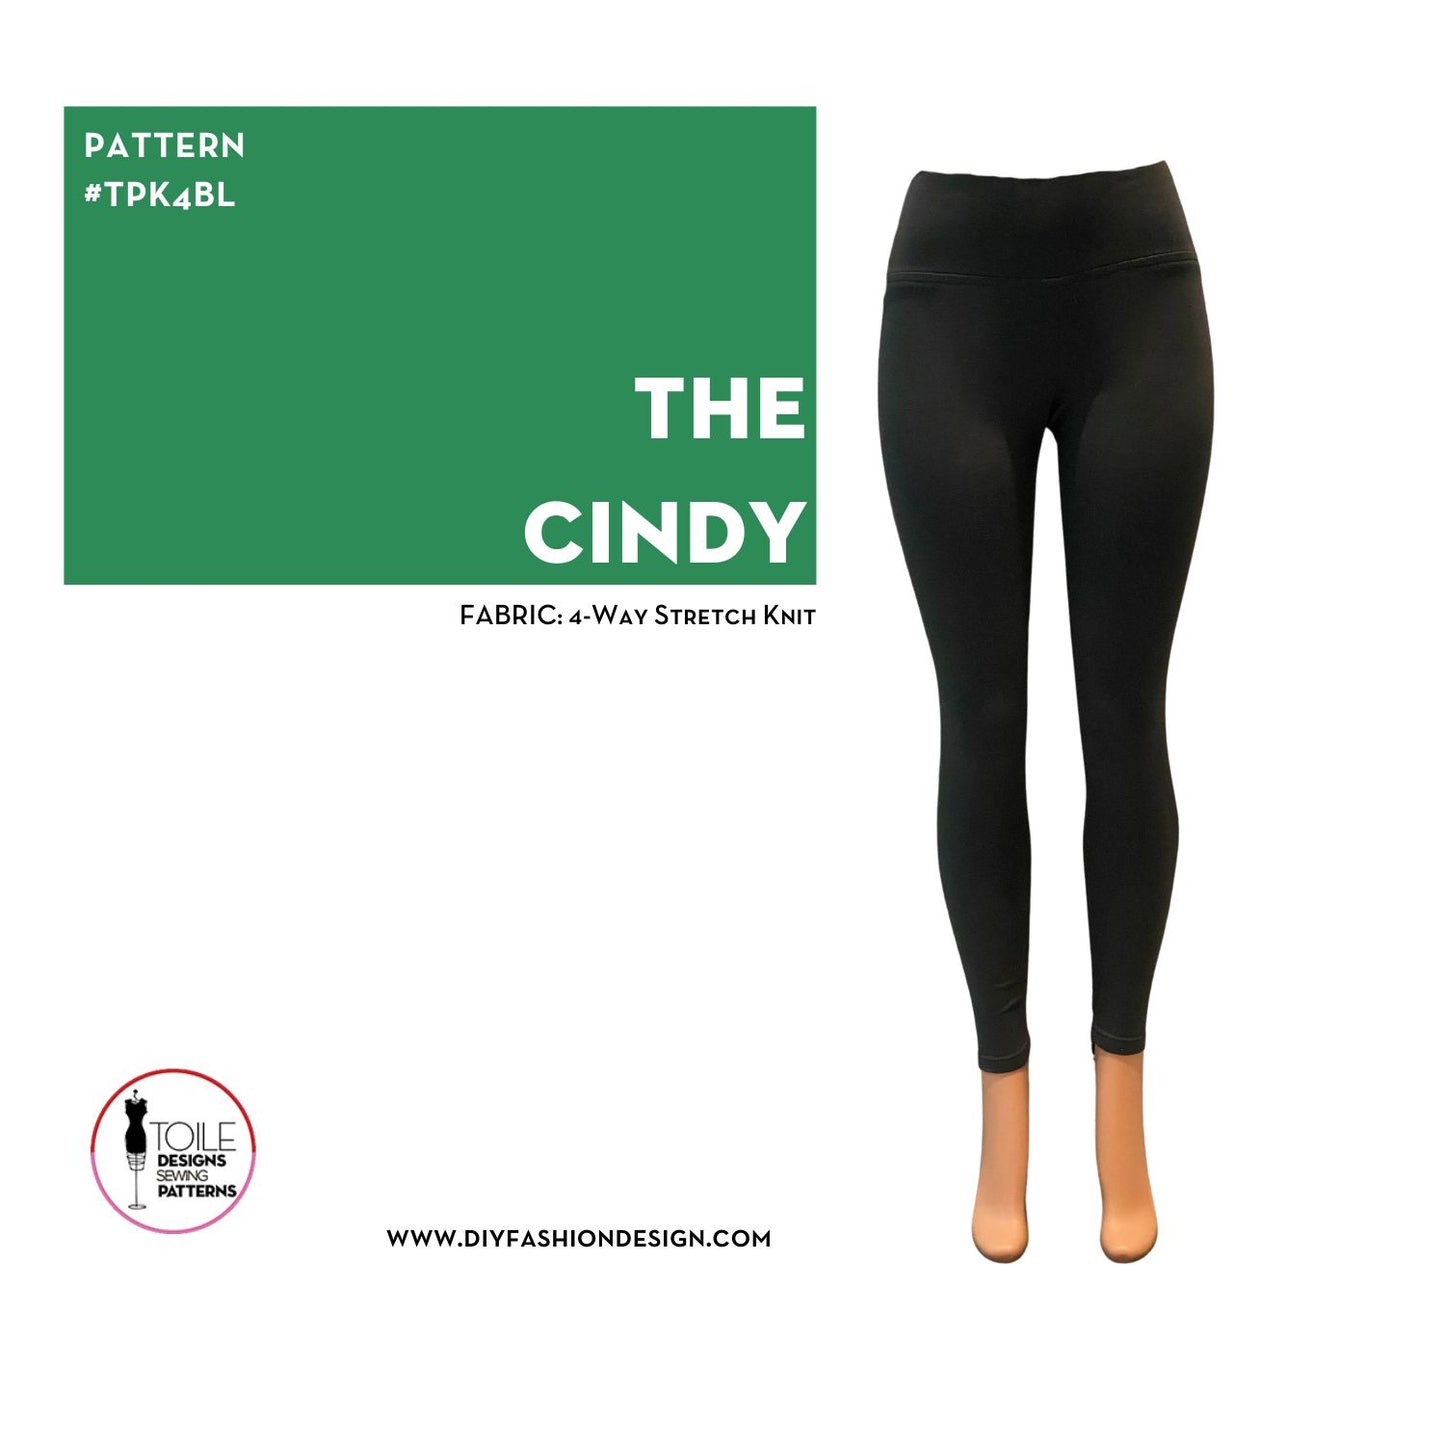 The Cindy